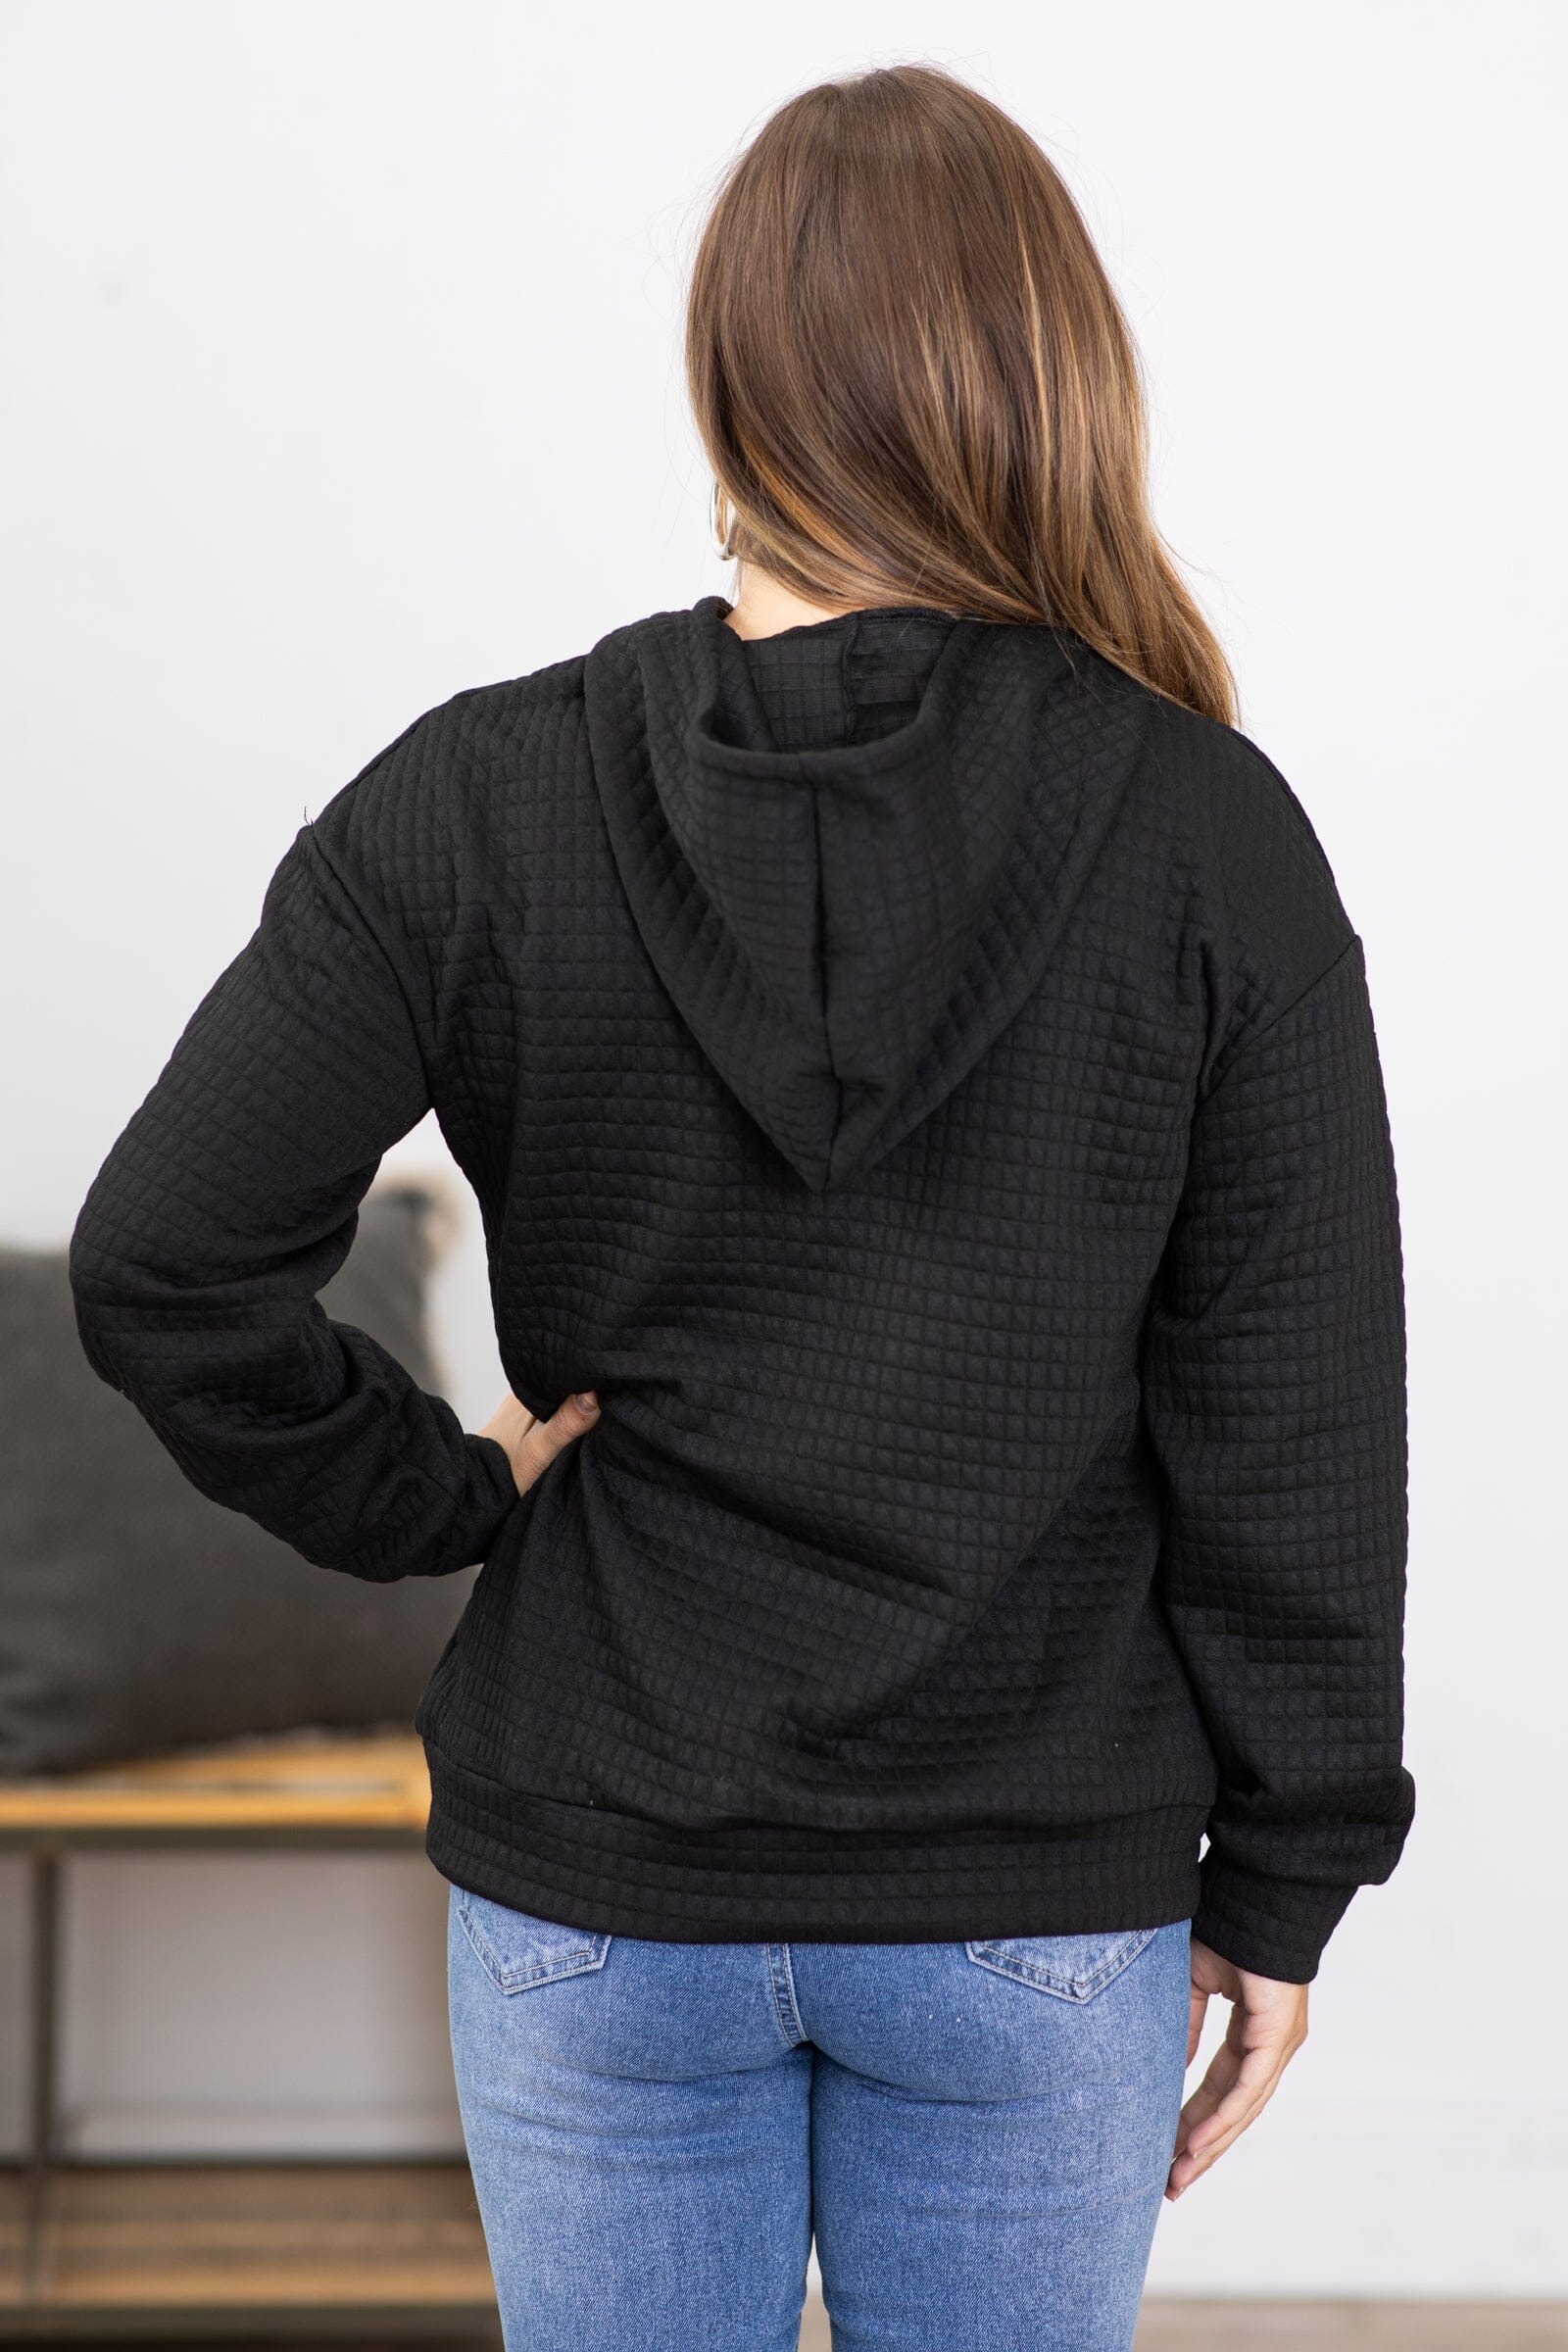 Black Textured Hooded Top With Pocket - Filly Flair